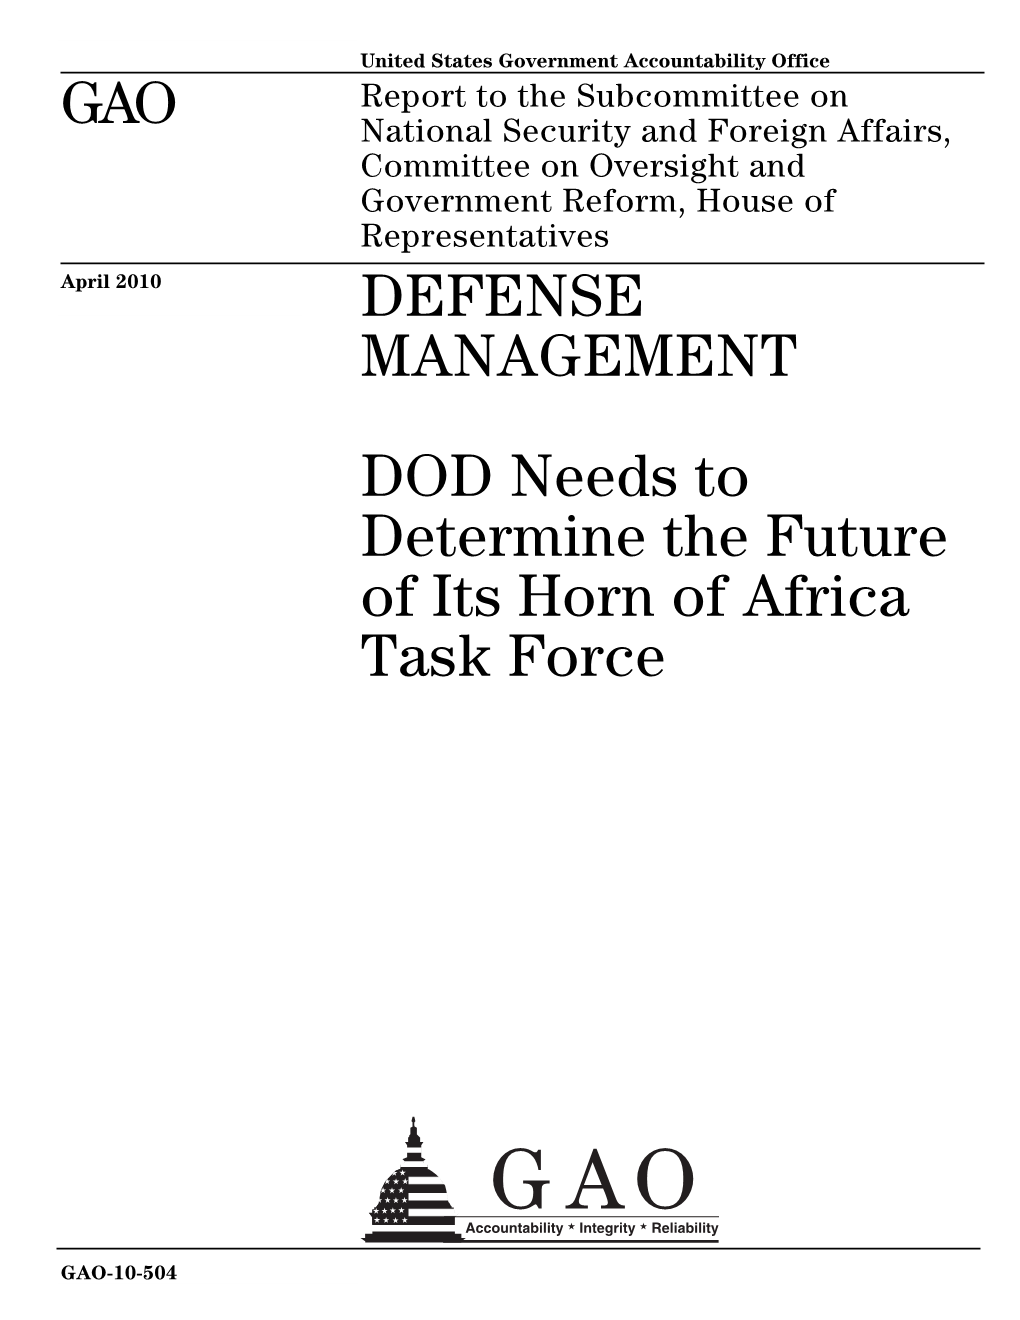 GAO-10-504 Defense Management: DOD Needs to Determine The